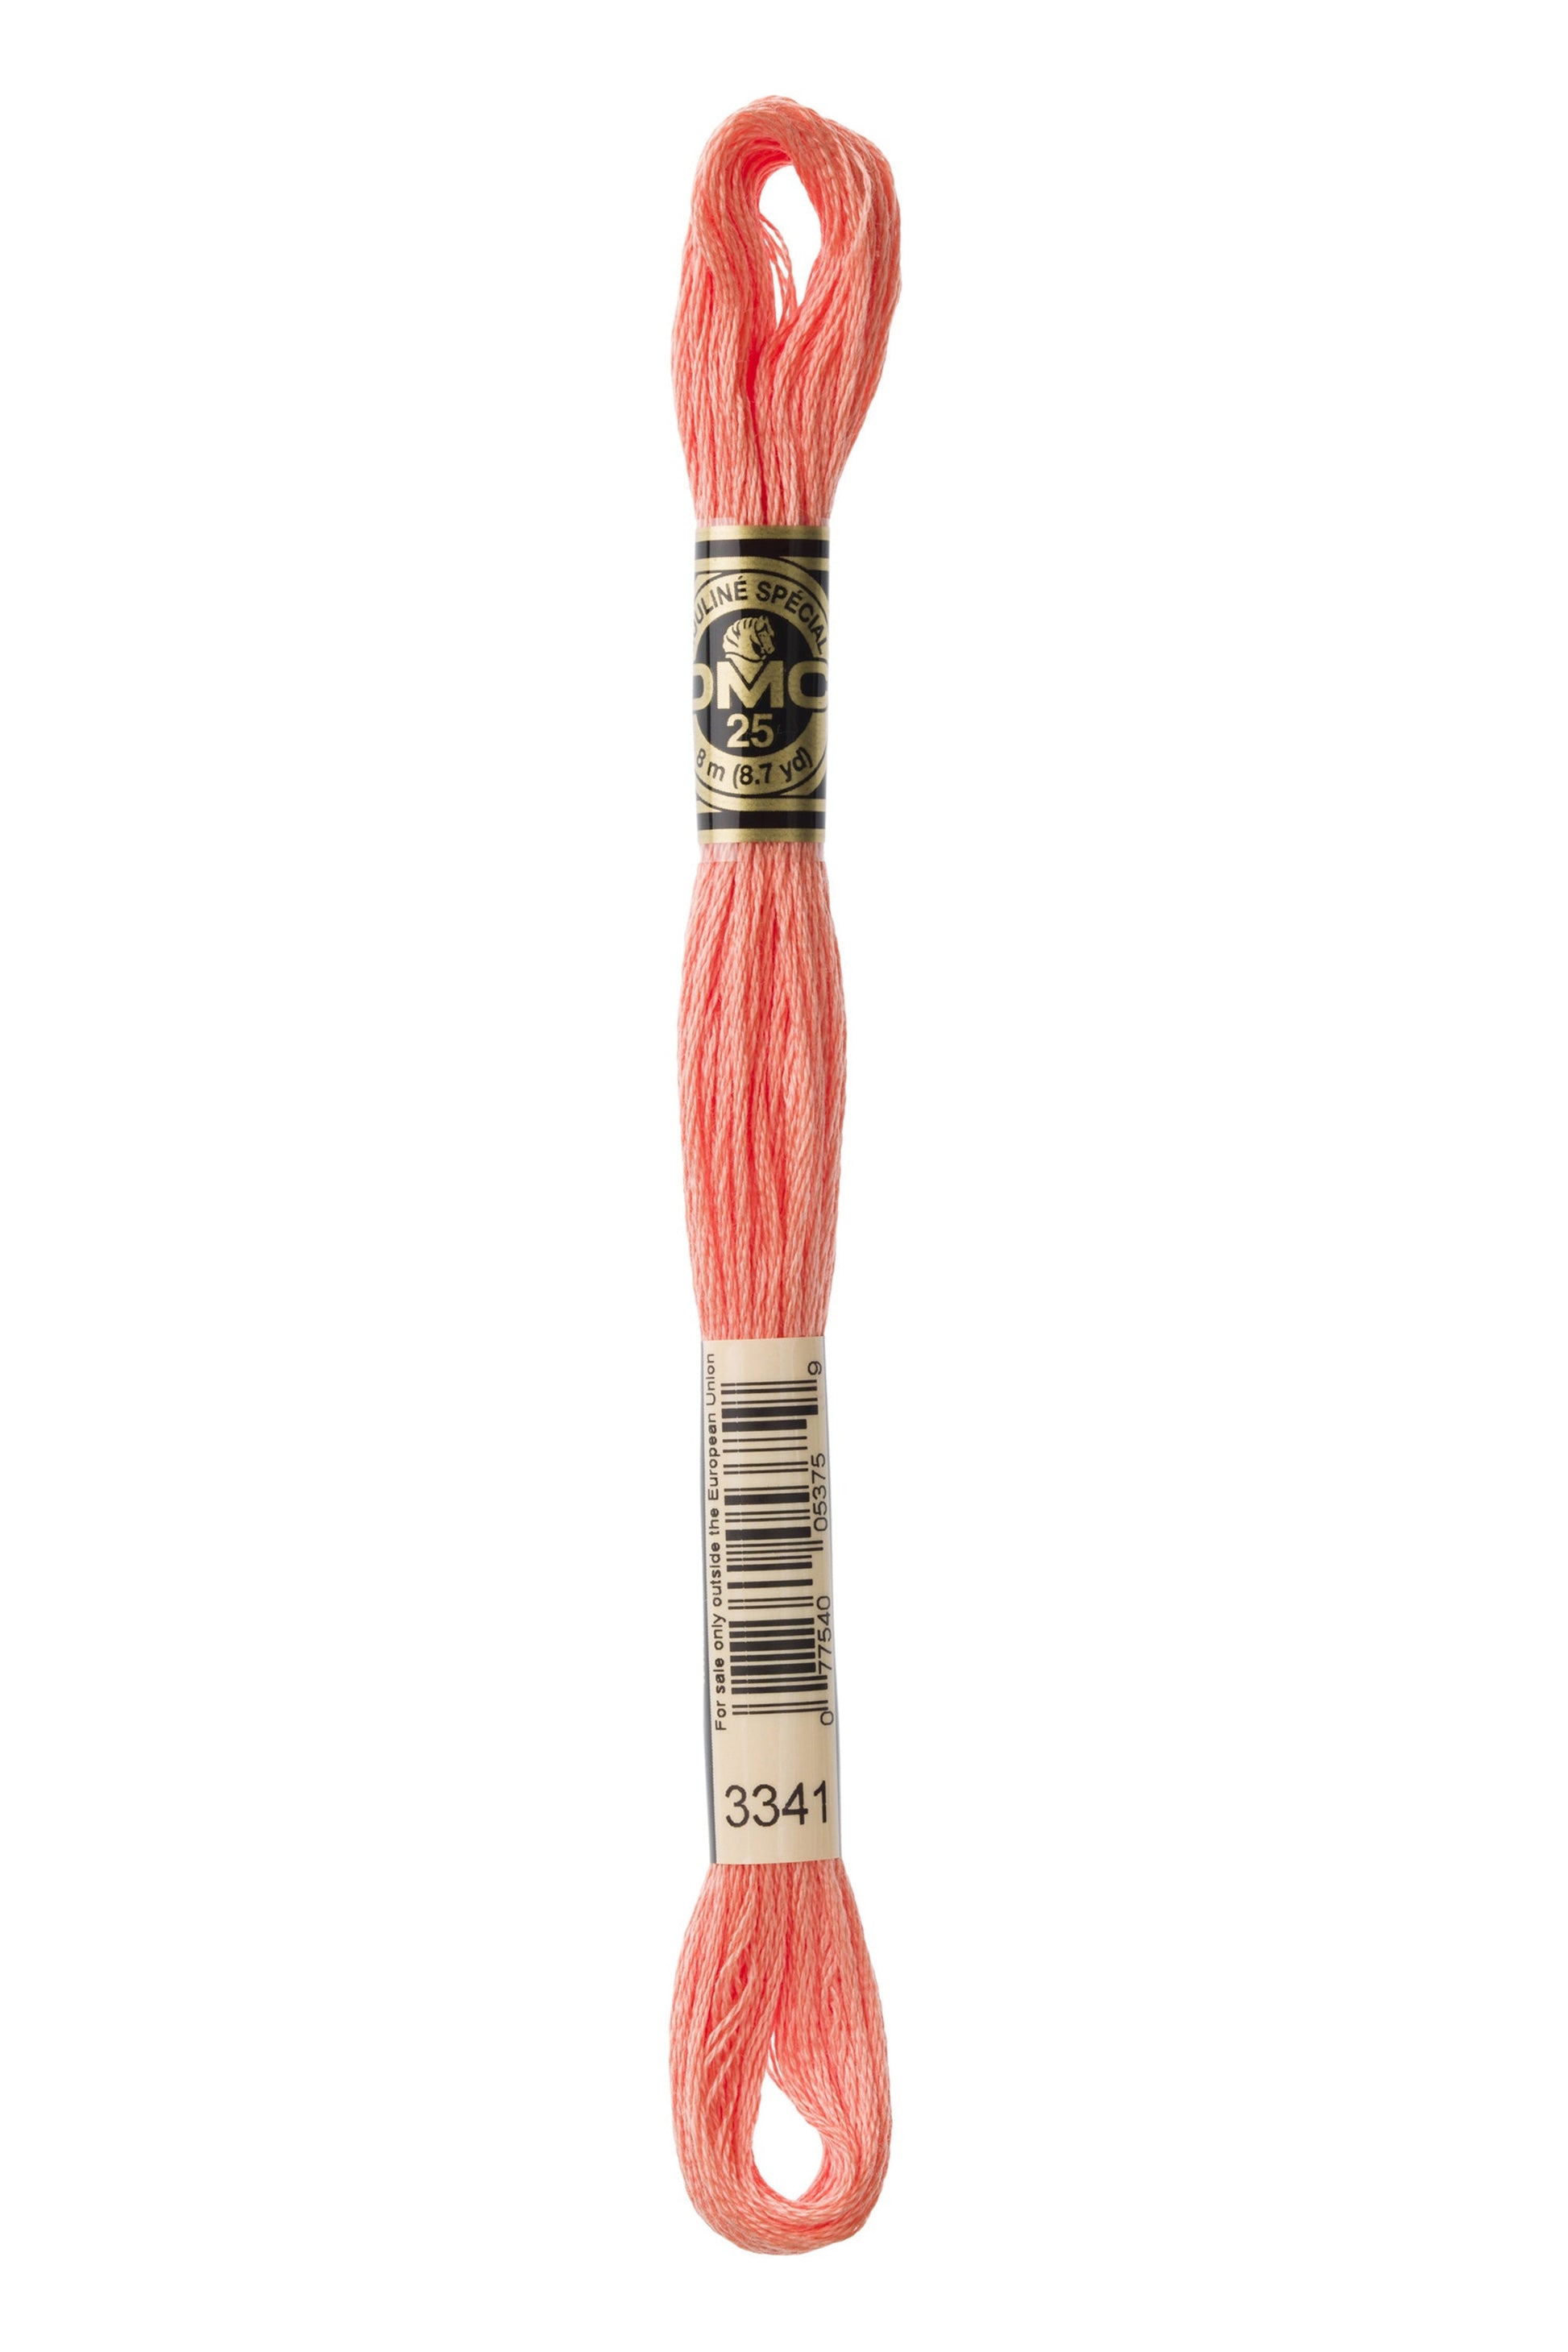 Six-Strand Embroidery Floss - 3341 (Kitten’s Nose)-Embroidery Thread-Wild and Woolly Yarns